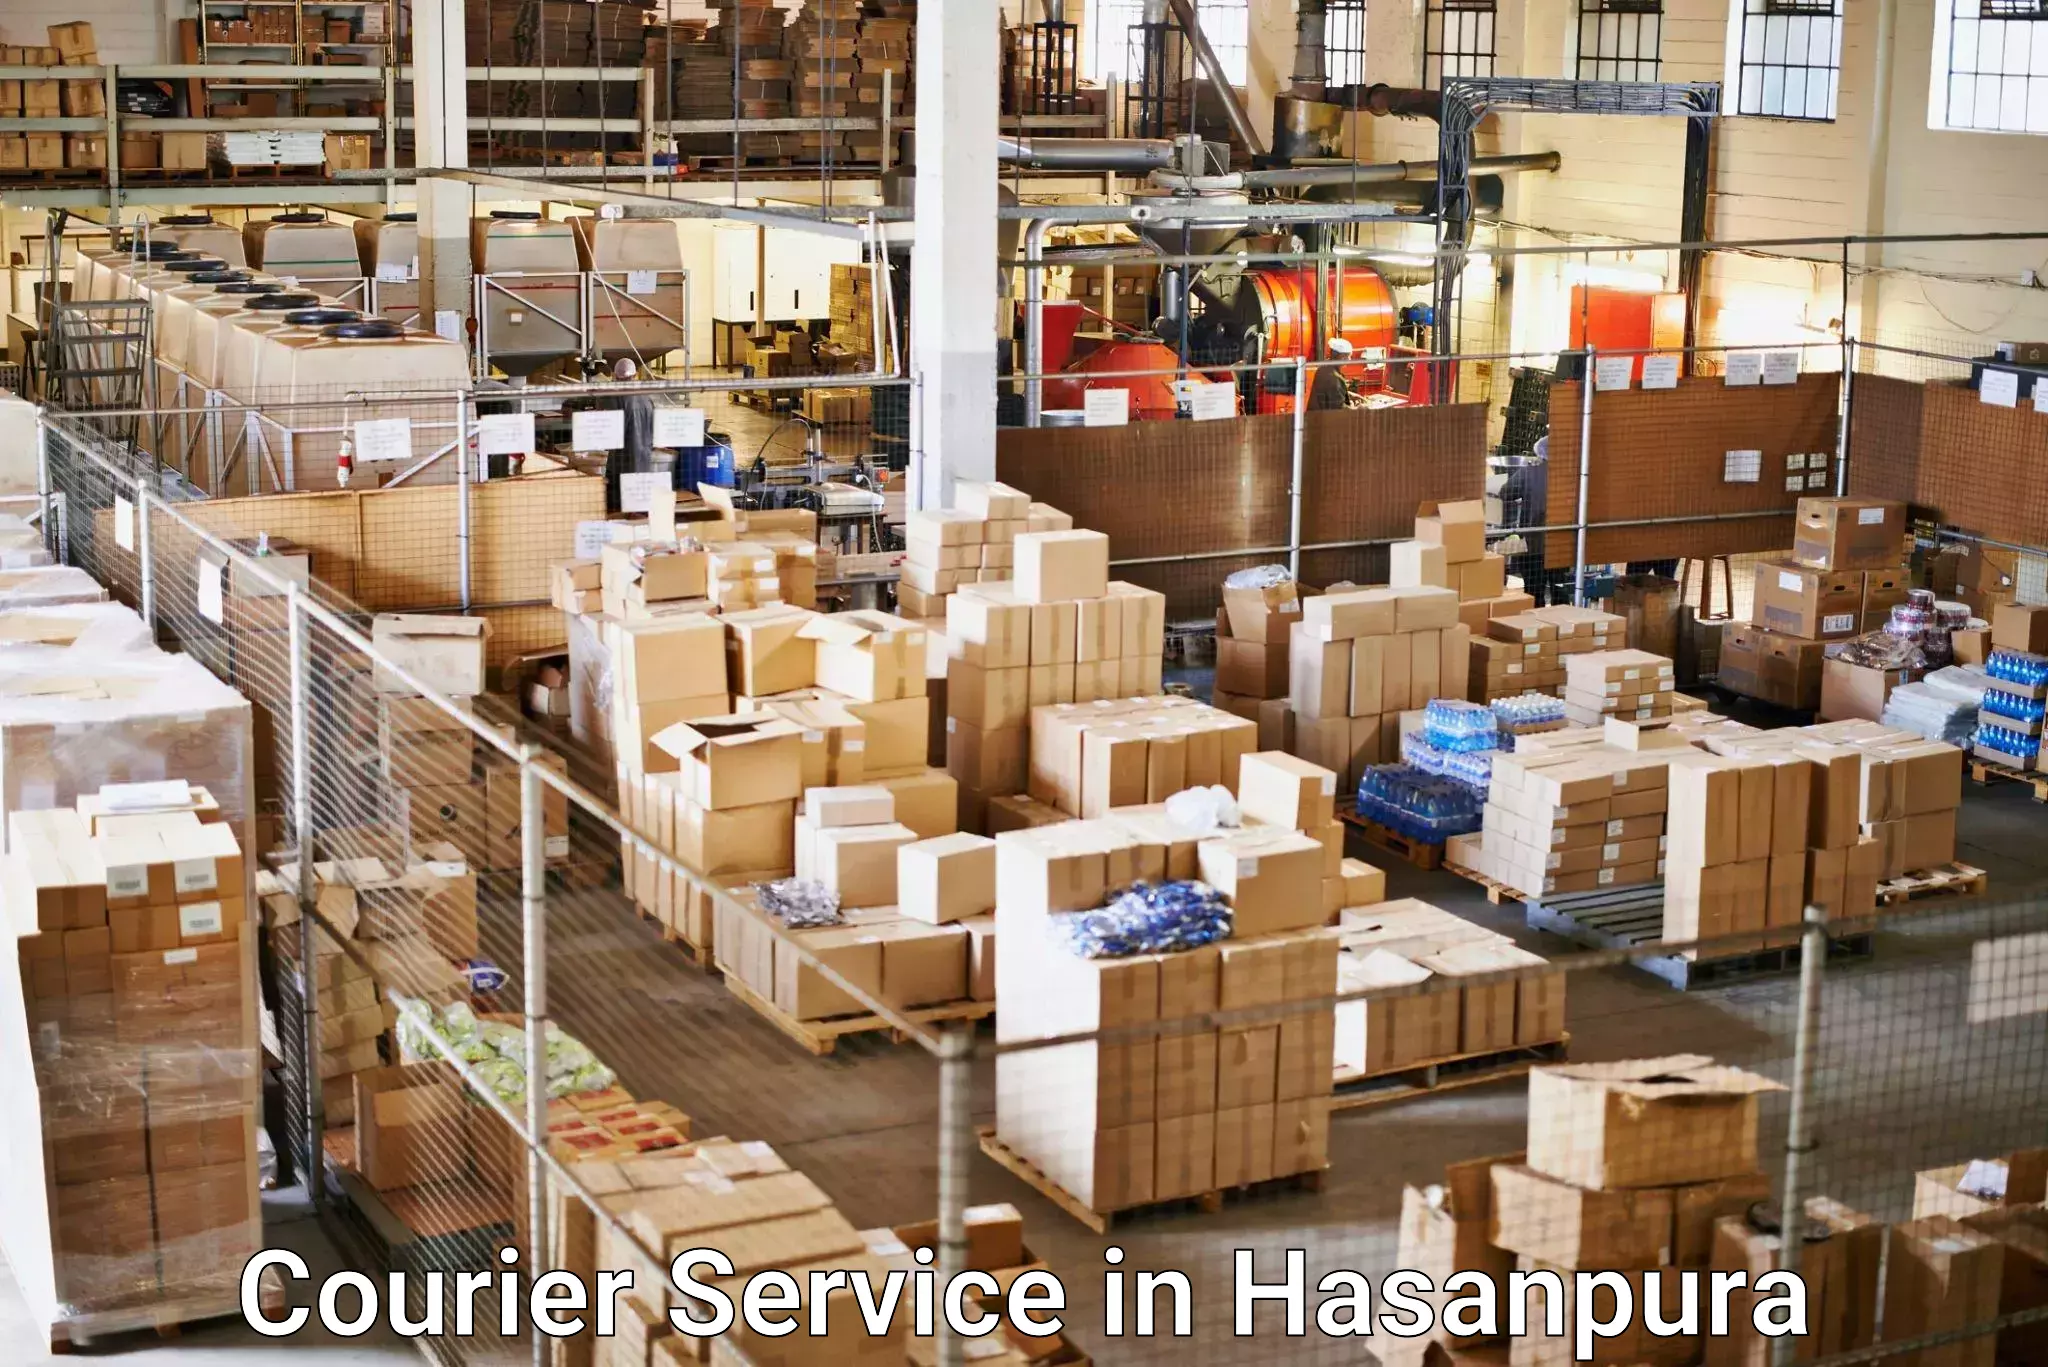 Dynamic parcel delivery in Hasanpura